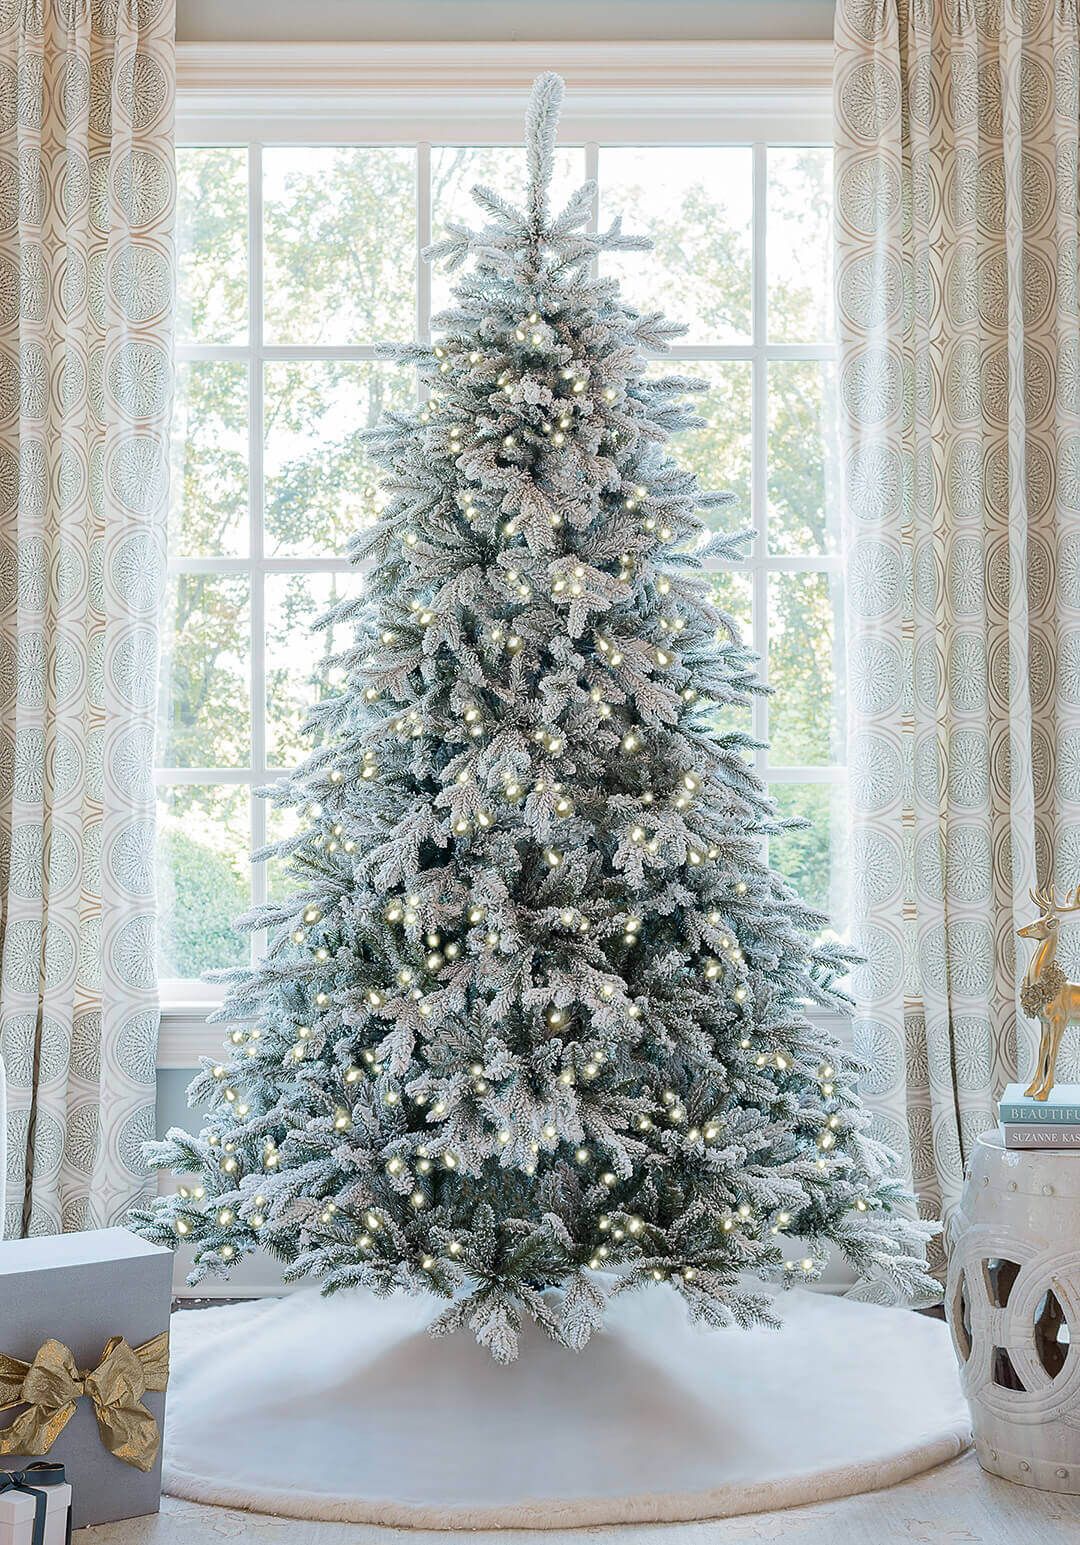 8' Queen Flock® Artificial Christmas Tree with 900 Warm White LED Lights | King of Christmas